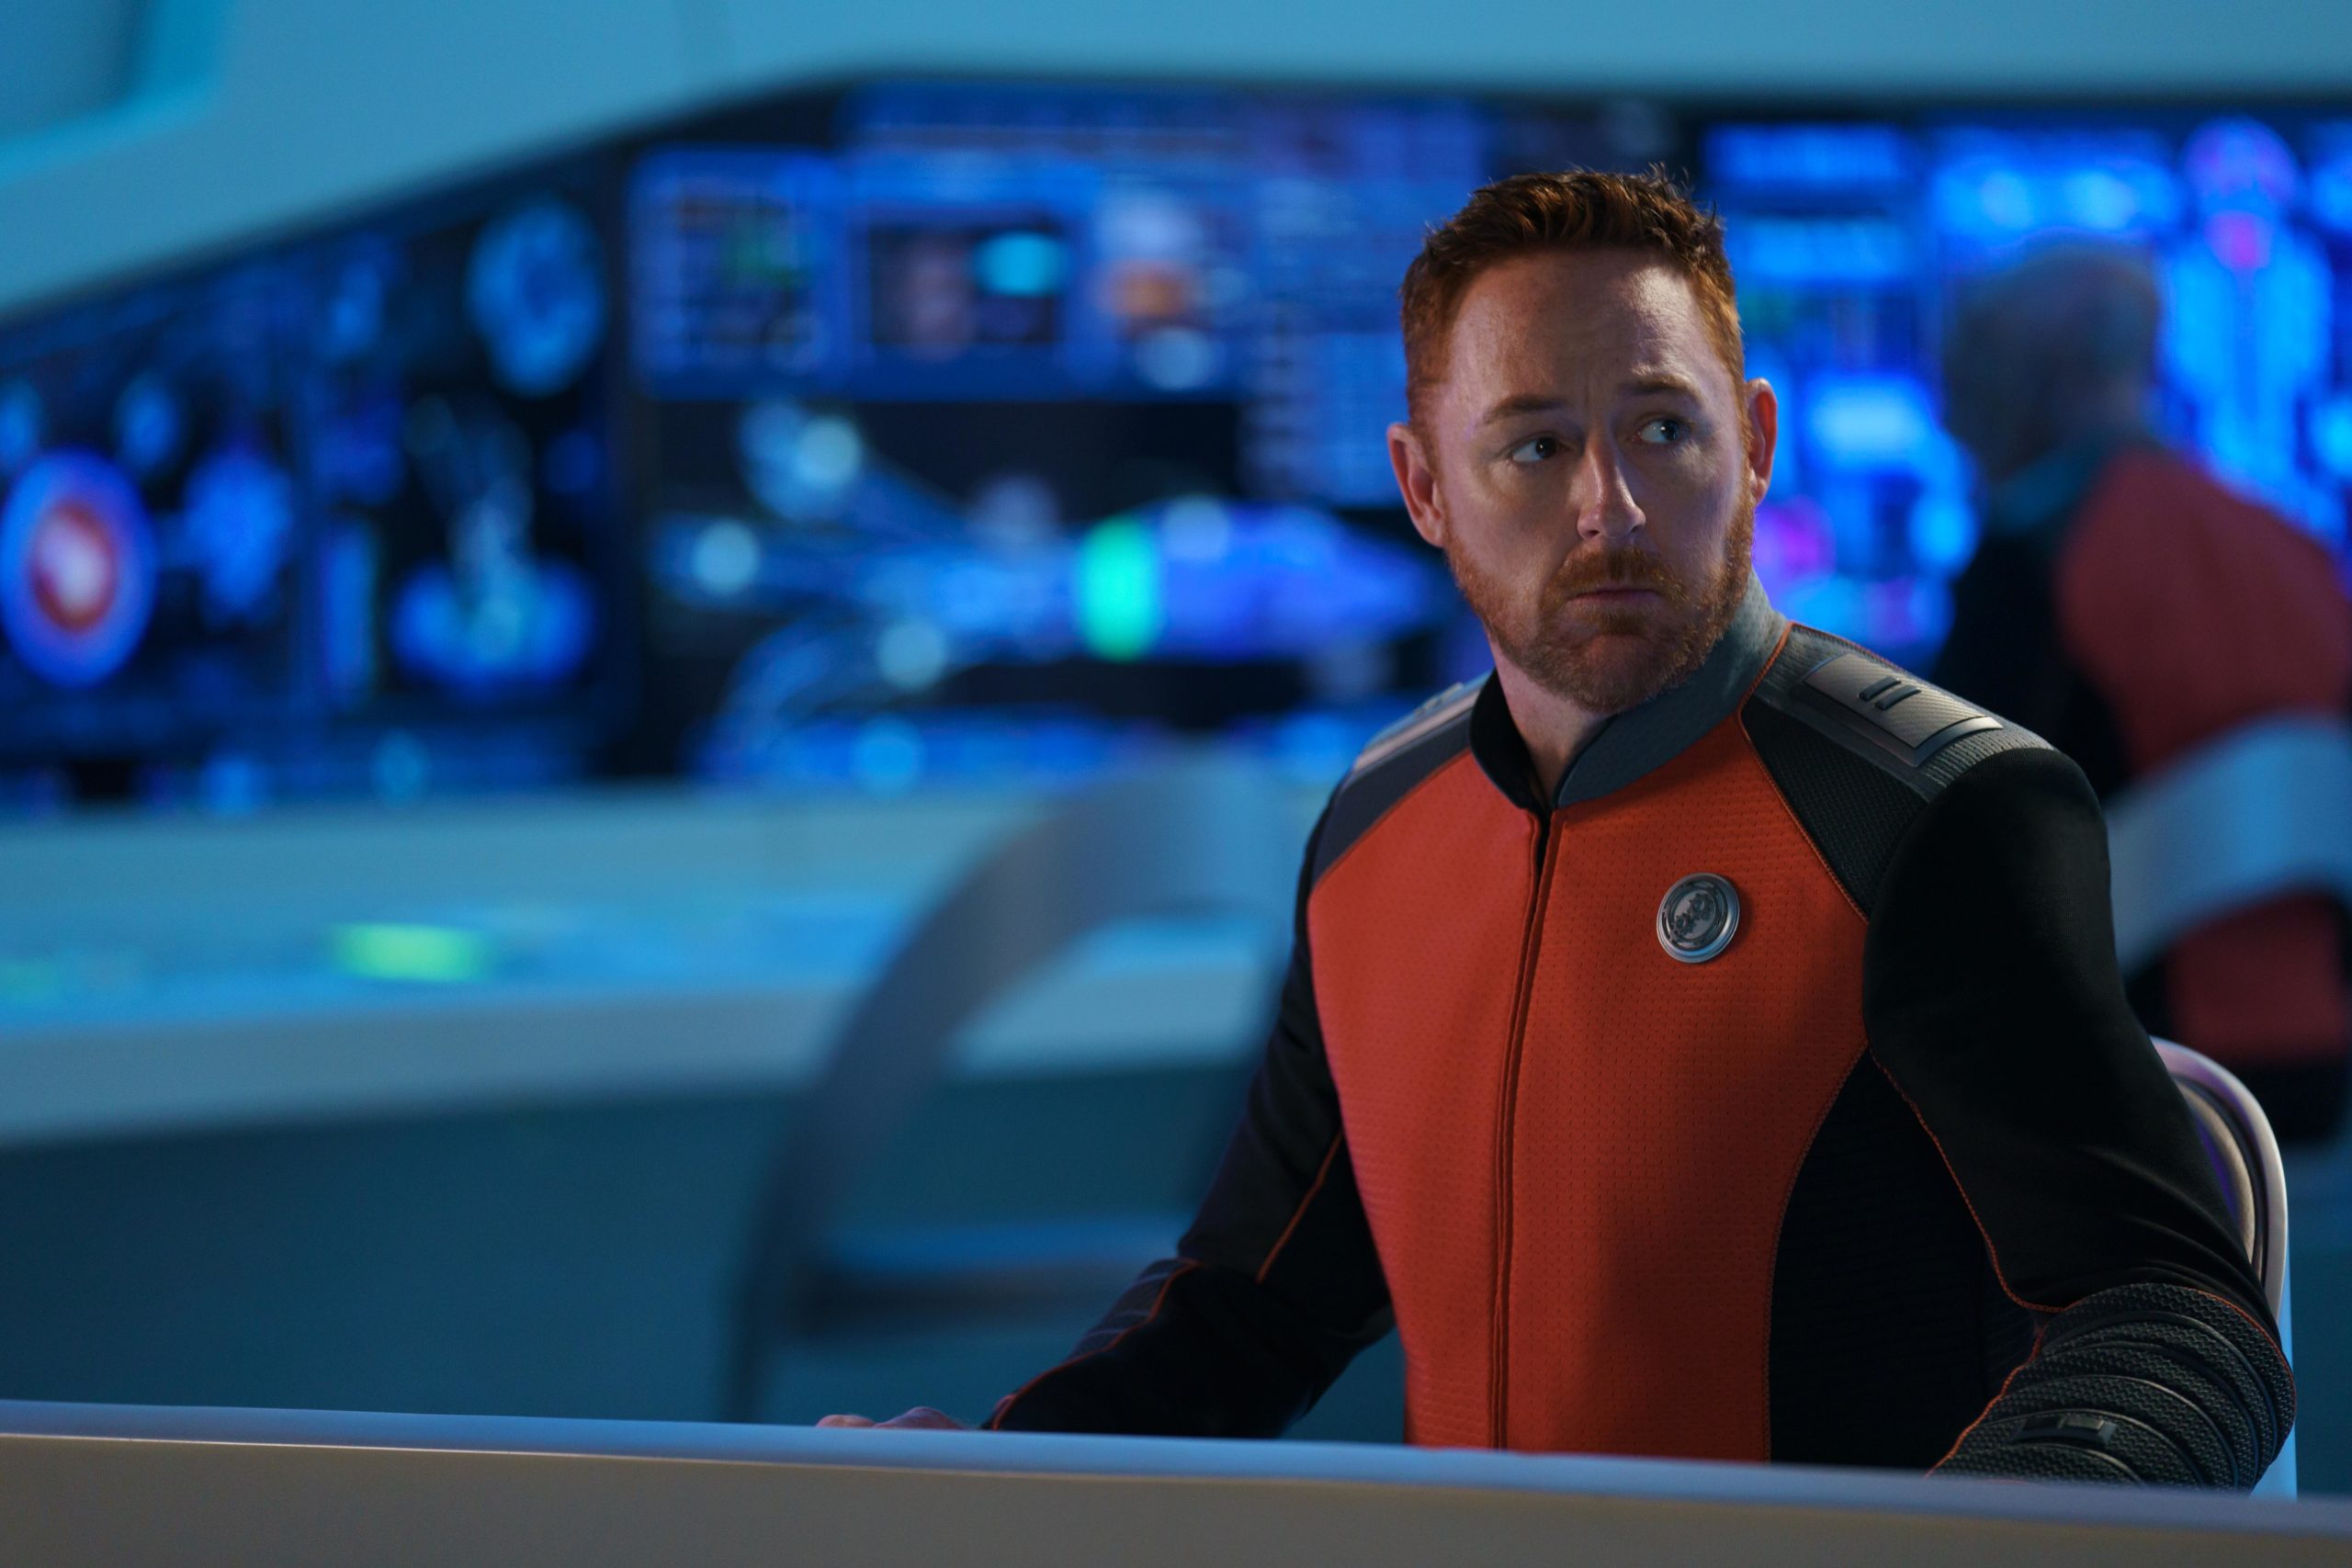 Hulu’s The Orville: New Horizons| Scott Grimes and J. Lee Interview [Exclusive]